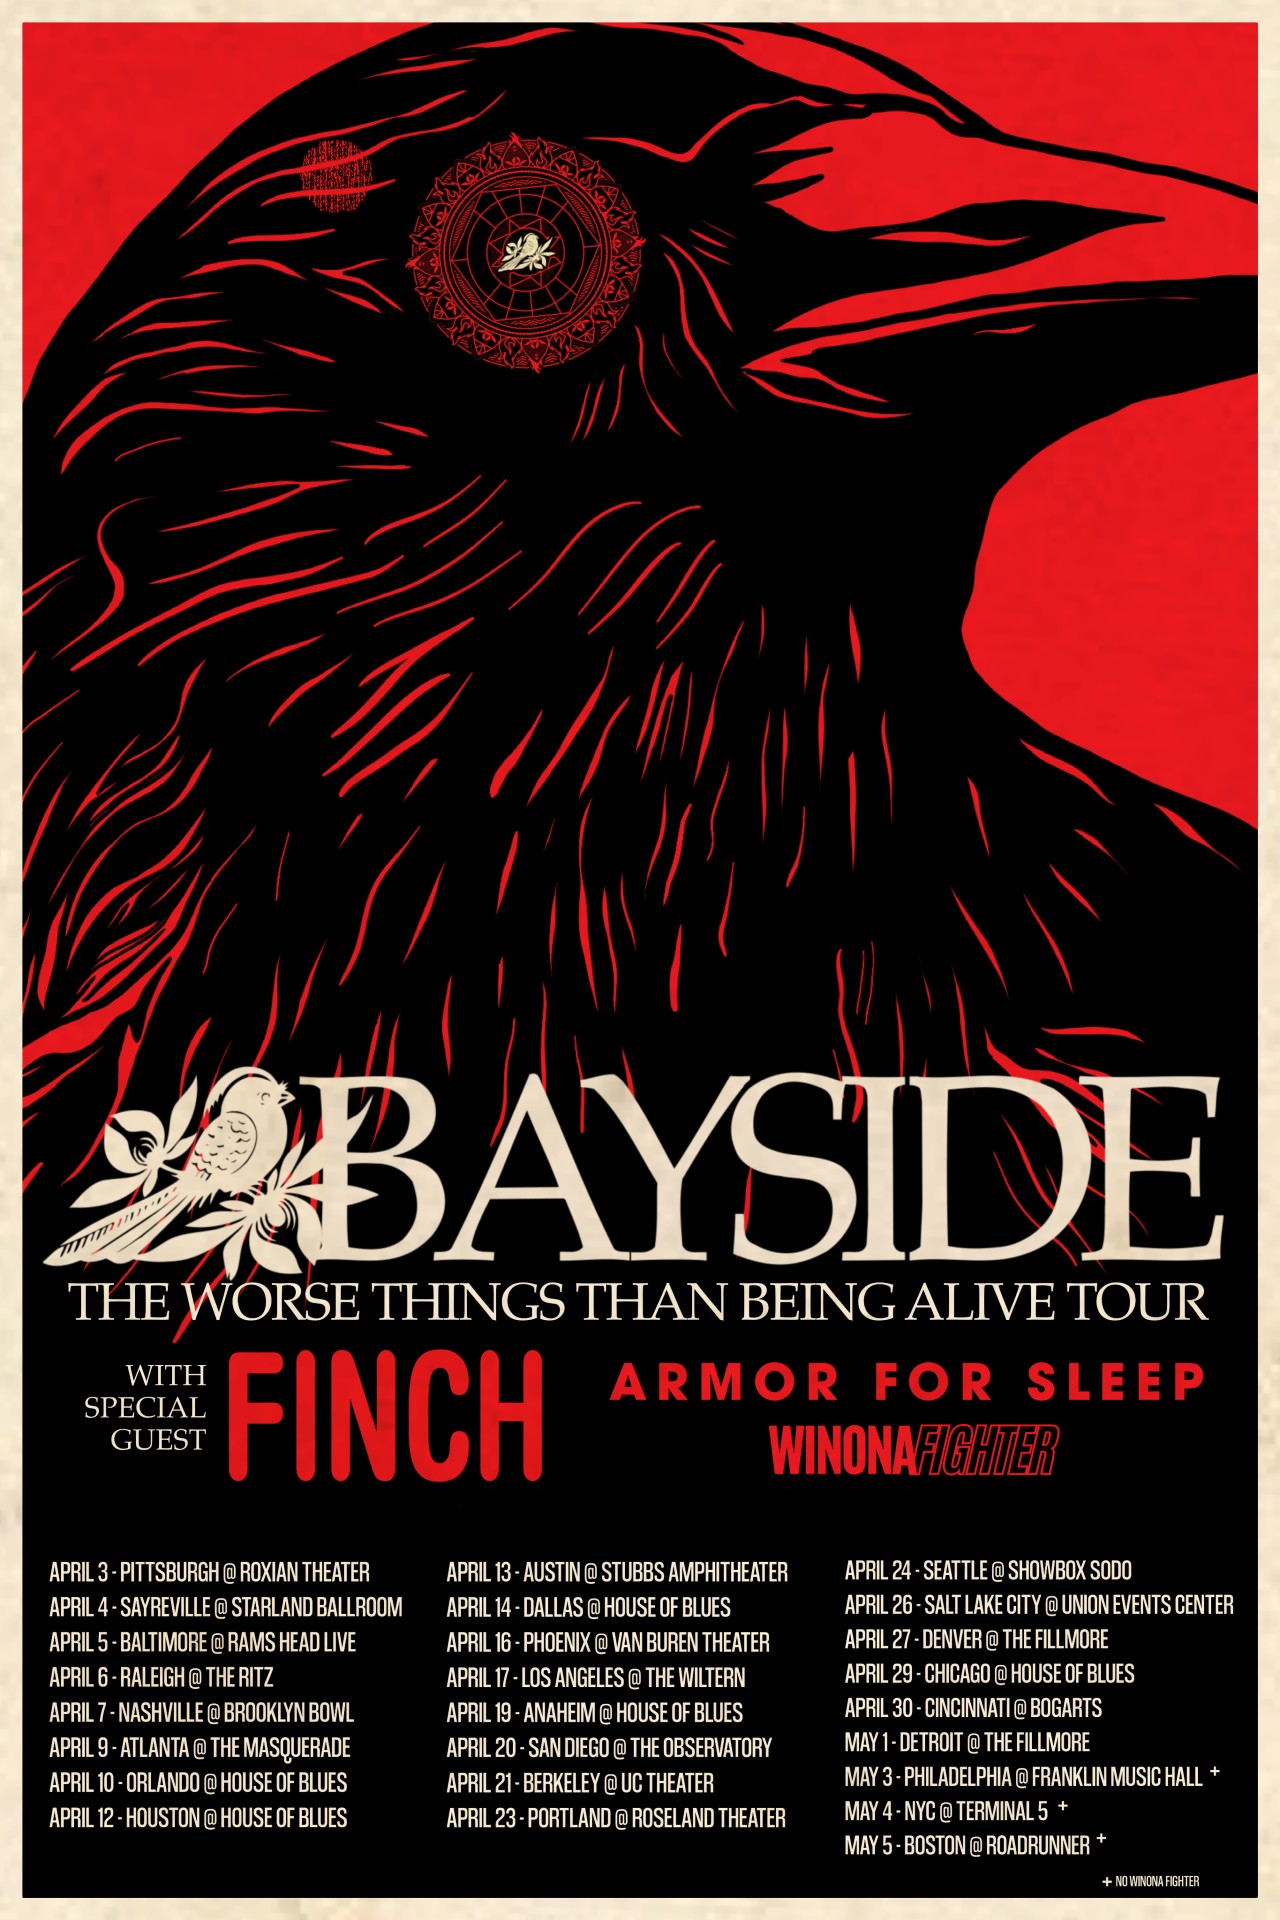 Bayside “Worse Things Than Being Alive Tour” admat